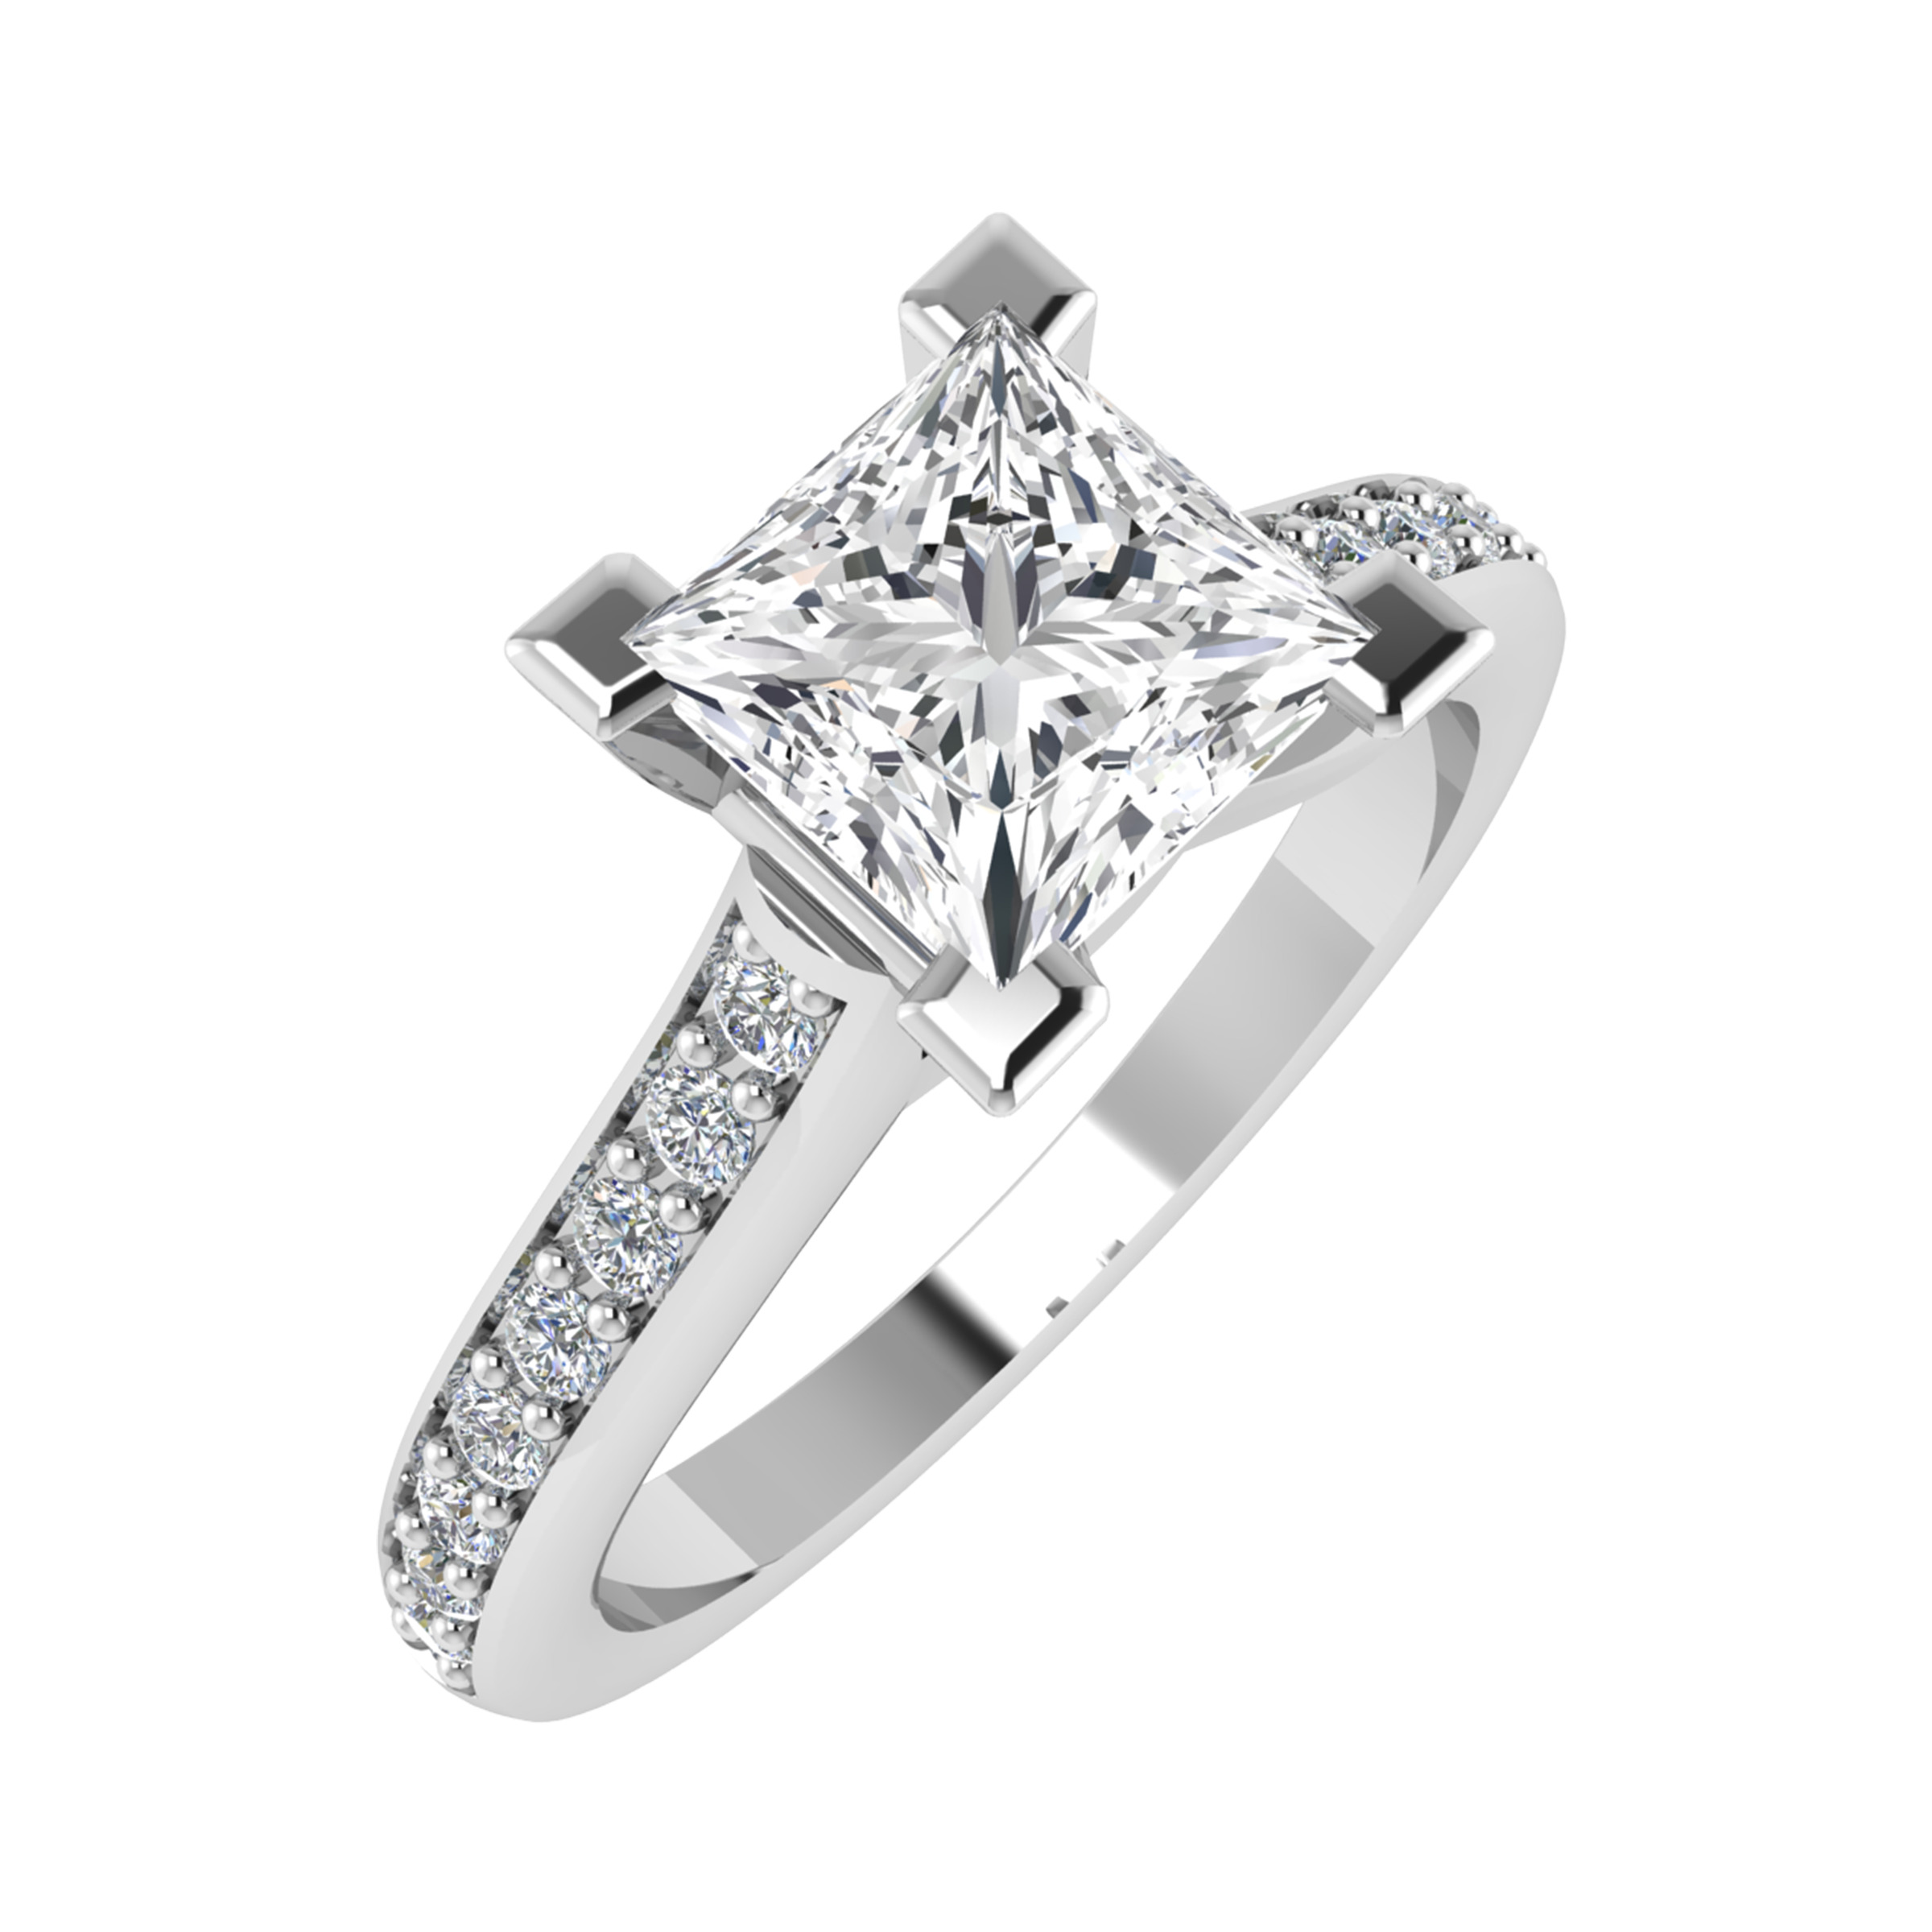 L Shaped Claw Princess Cut Side Stone Engagement Ring From 0.20-3.00 Carat